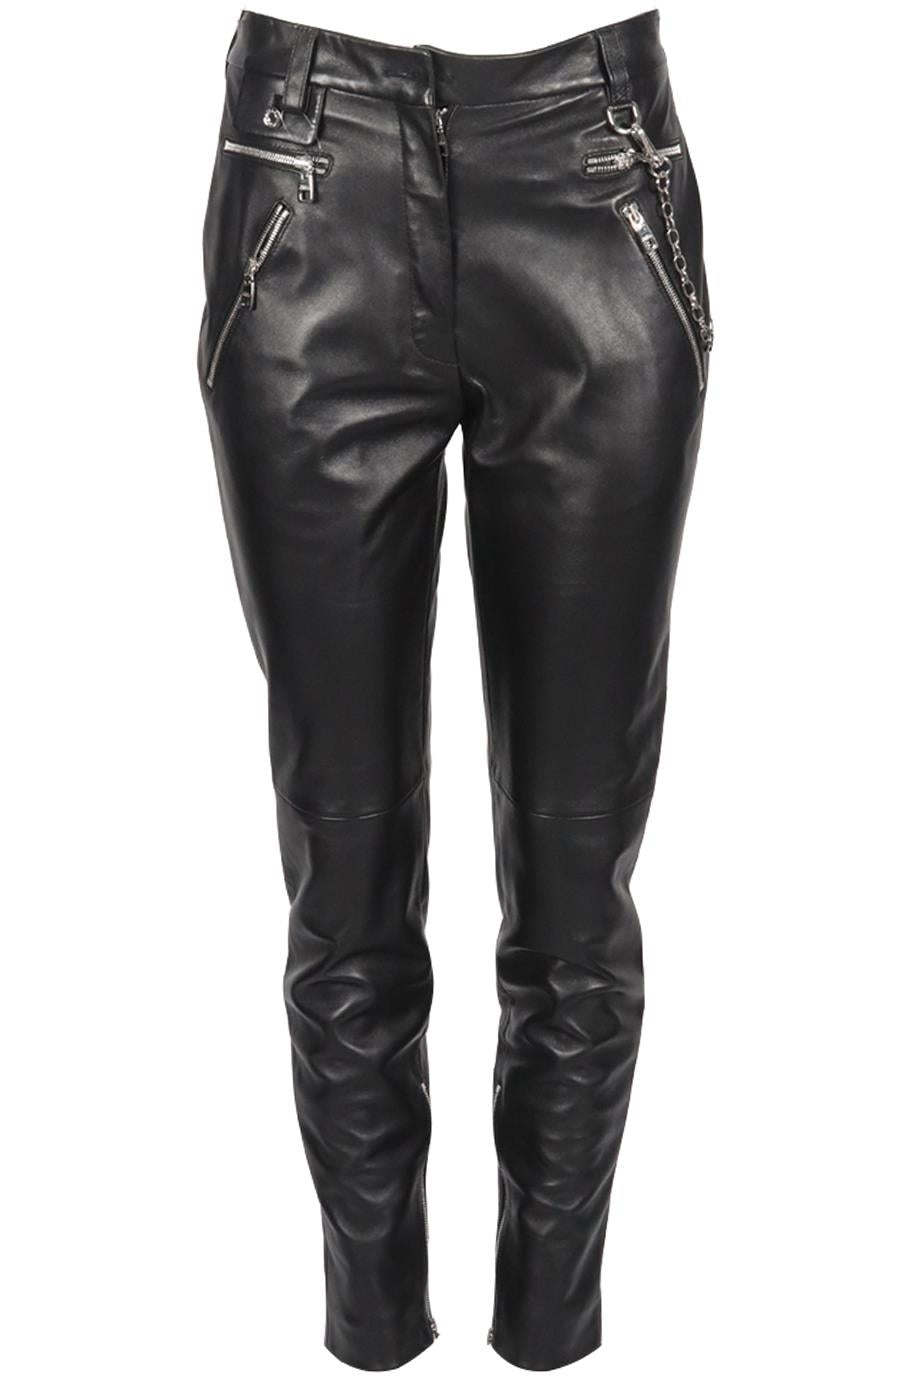 DOLCE AND GABBANA ZIP DEATIL LEATHER PANTS IT 44 UK 12